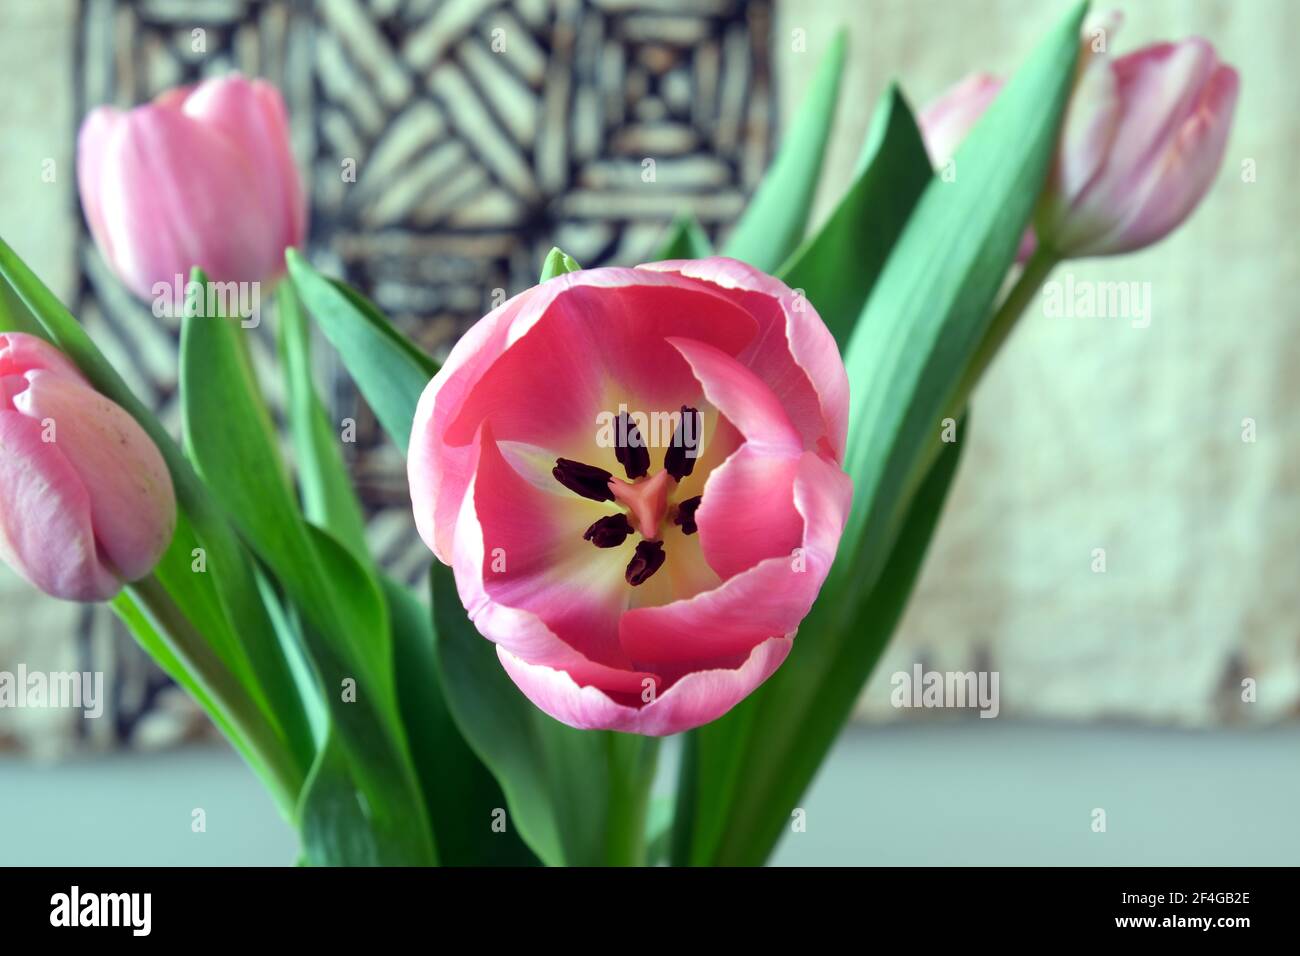 Pink tulips (Tulipa gesneriana) for Mother's Day. On the kitchen table with the tapa cloth behind. Stock Photo